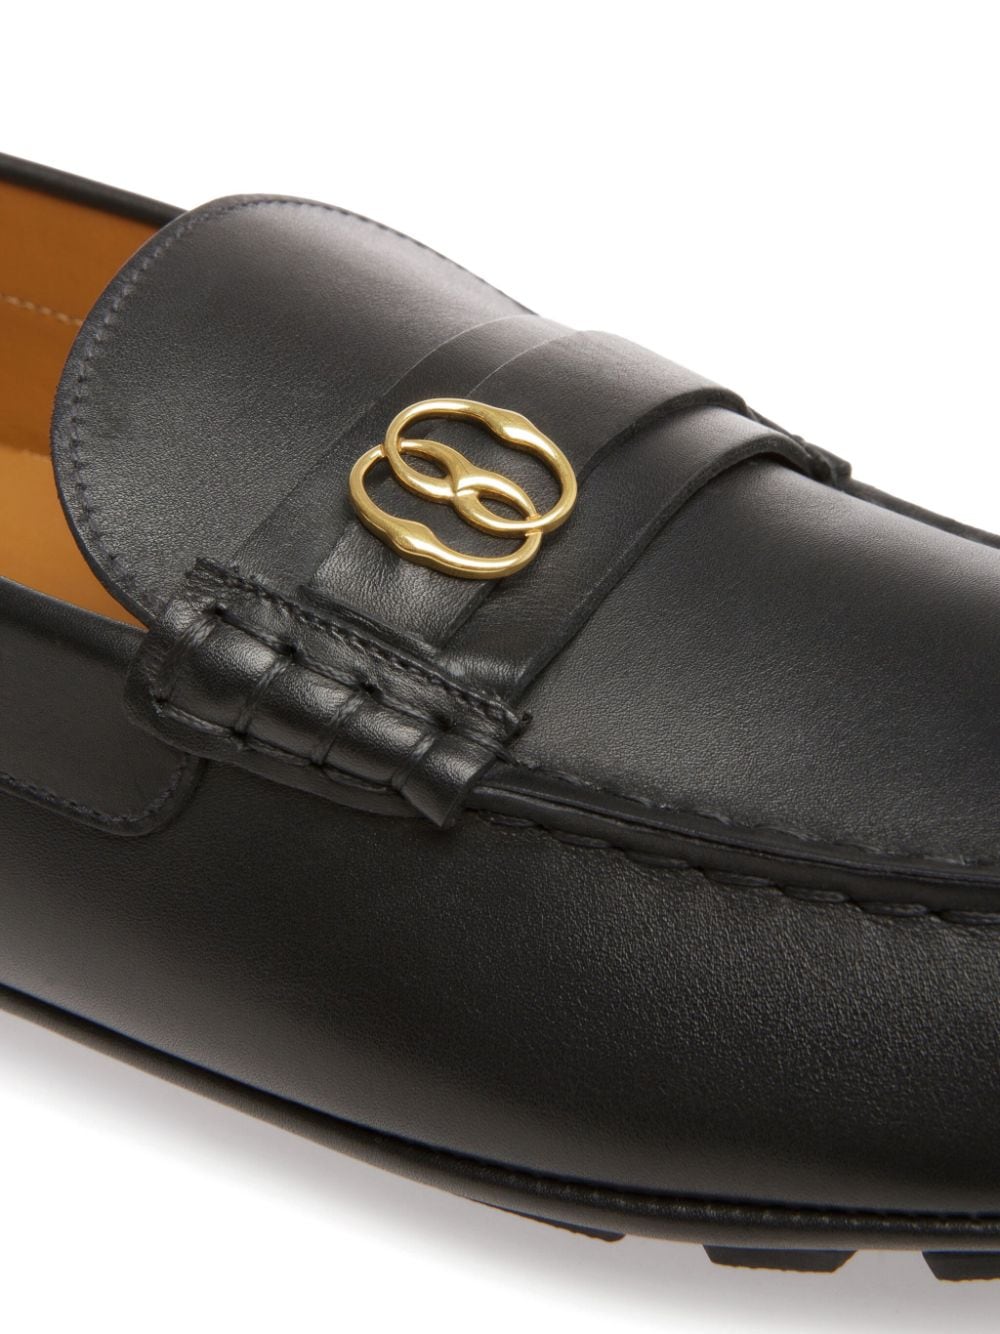 Shop Bally Keeper Leather Boat Shoes In Black